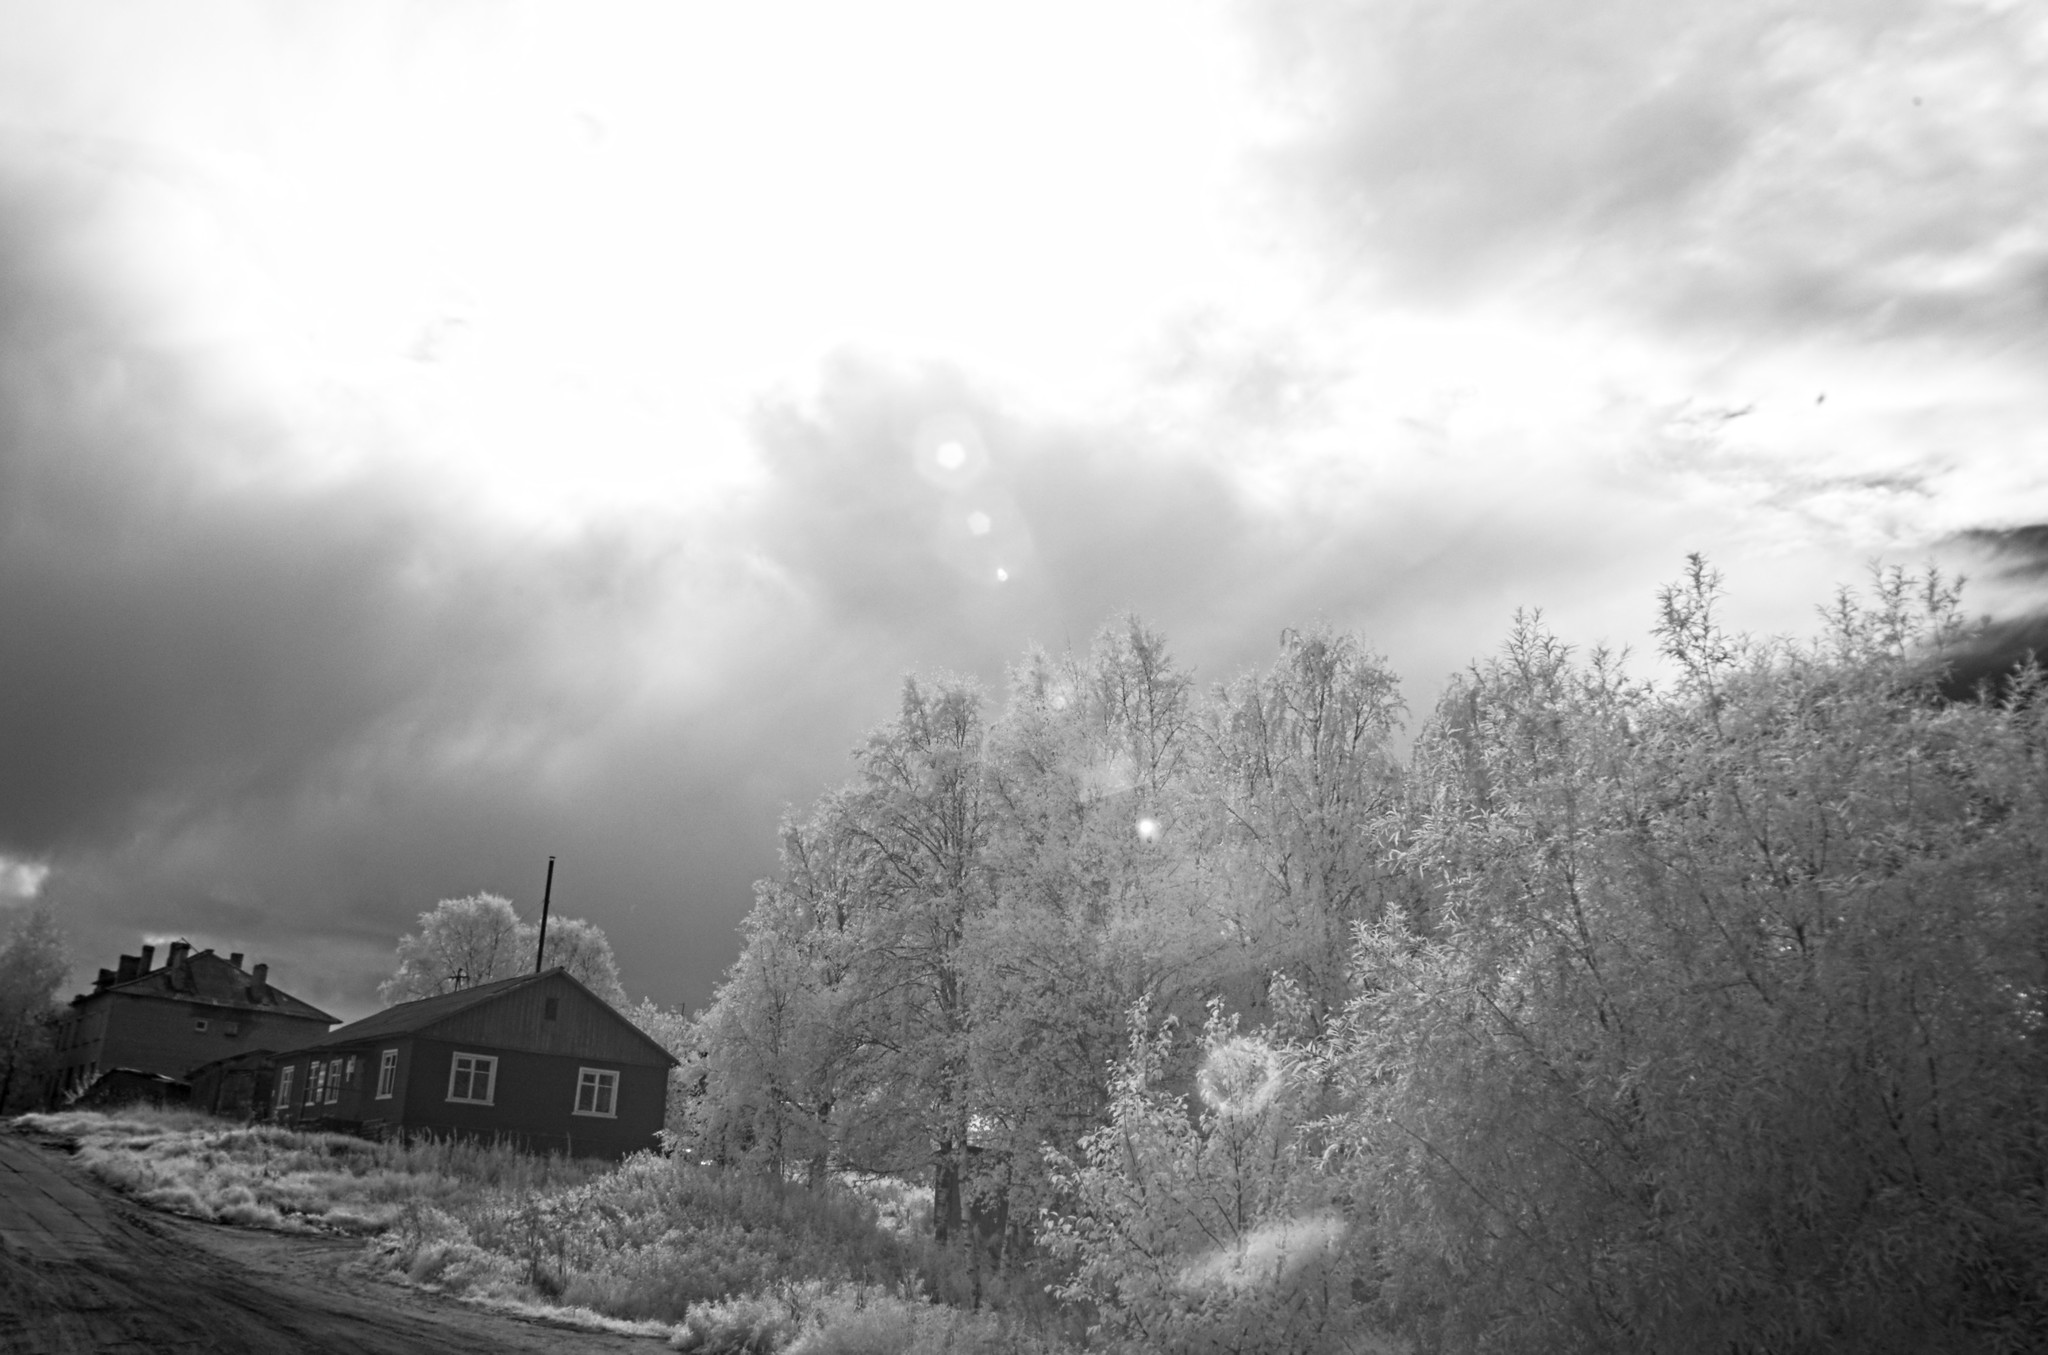 Timeless walks - 2 - My, Mezen, Infrared shooting, The photo, Black and white photo, Longpost